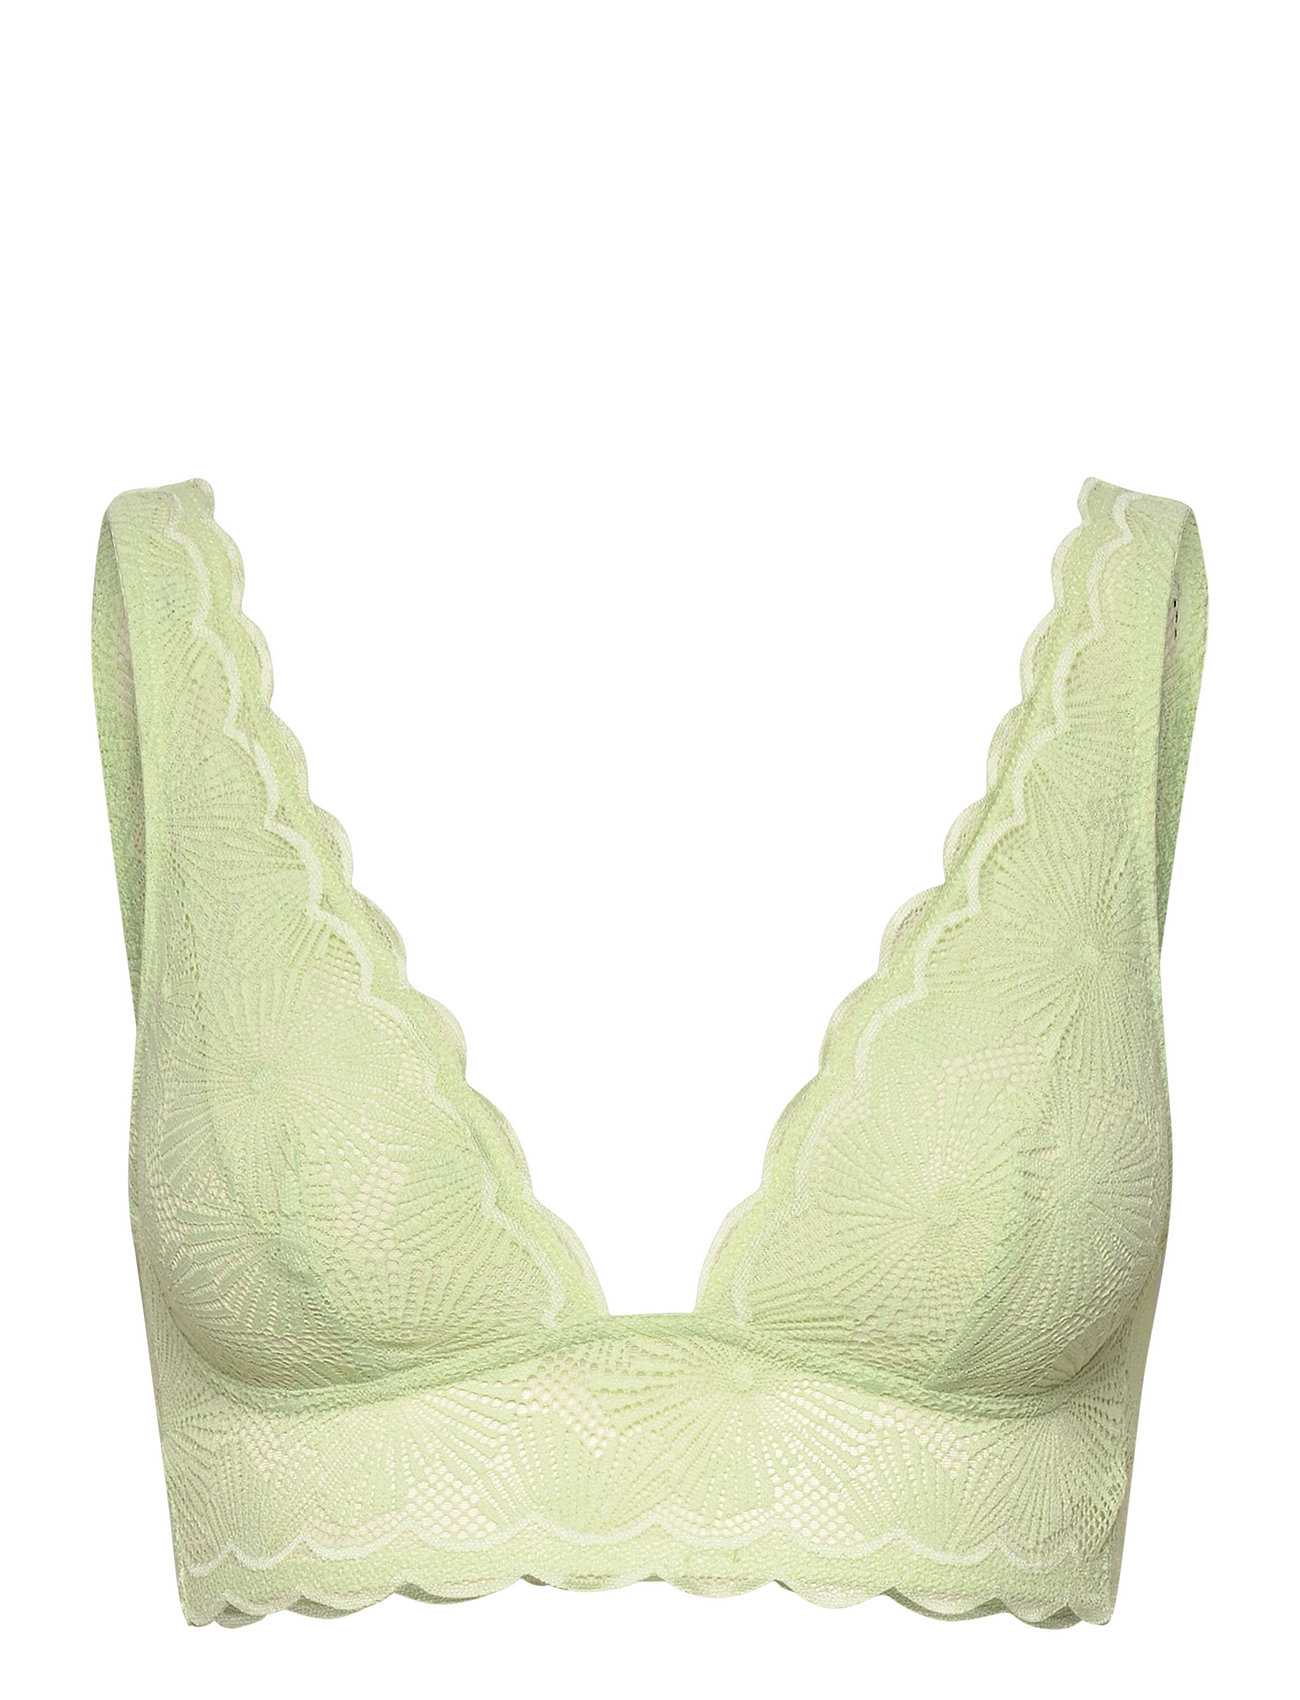 Esprit Bodywear Women Non-padded, Non-wired Bra Made Of Patterned Lace -  bralette 